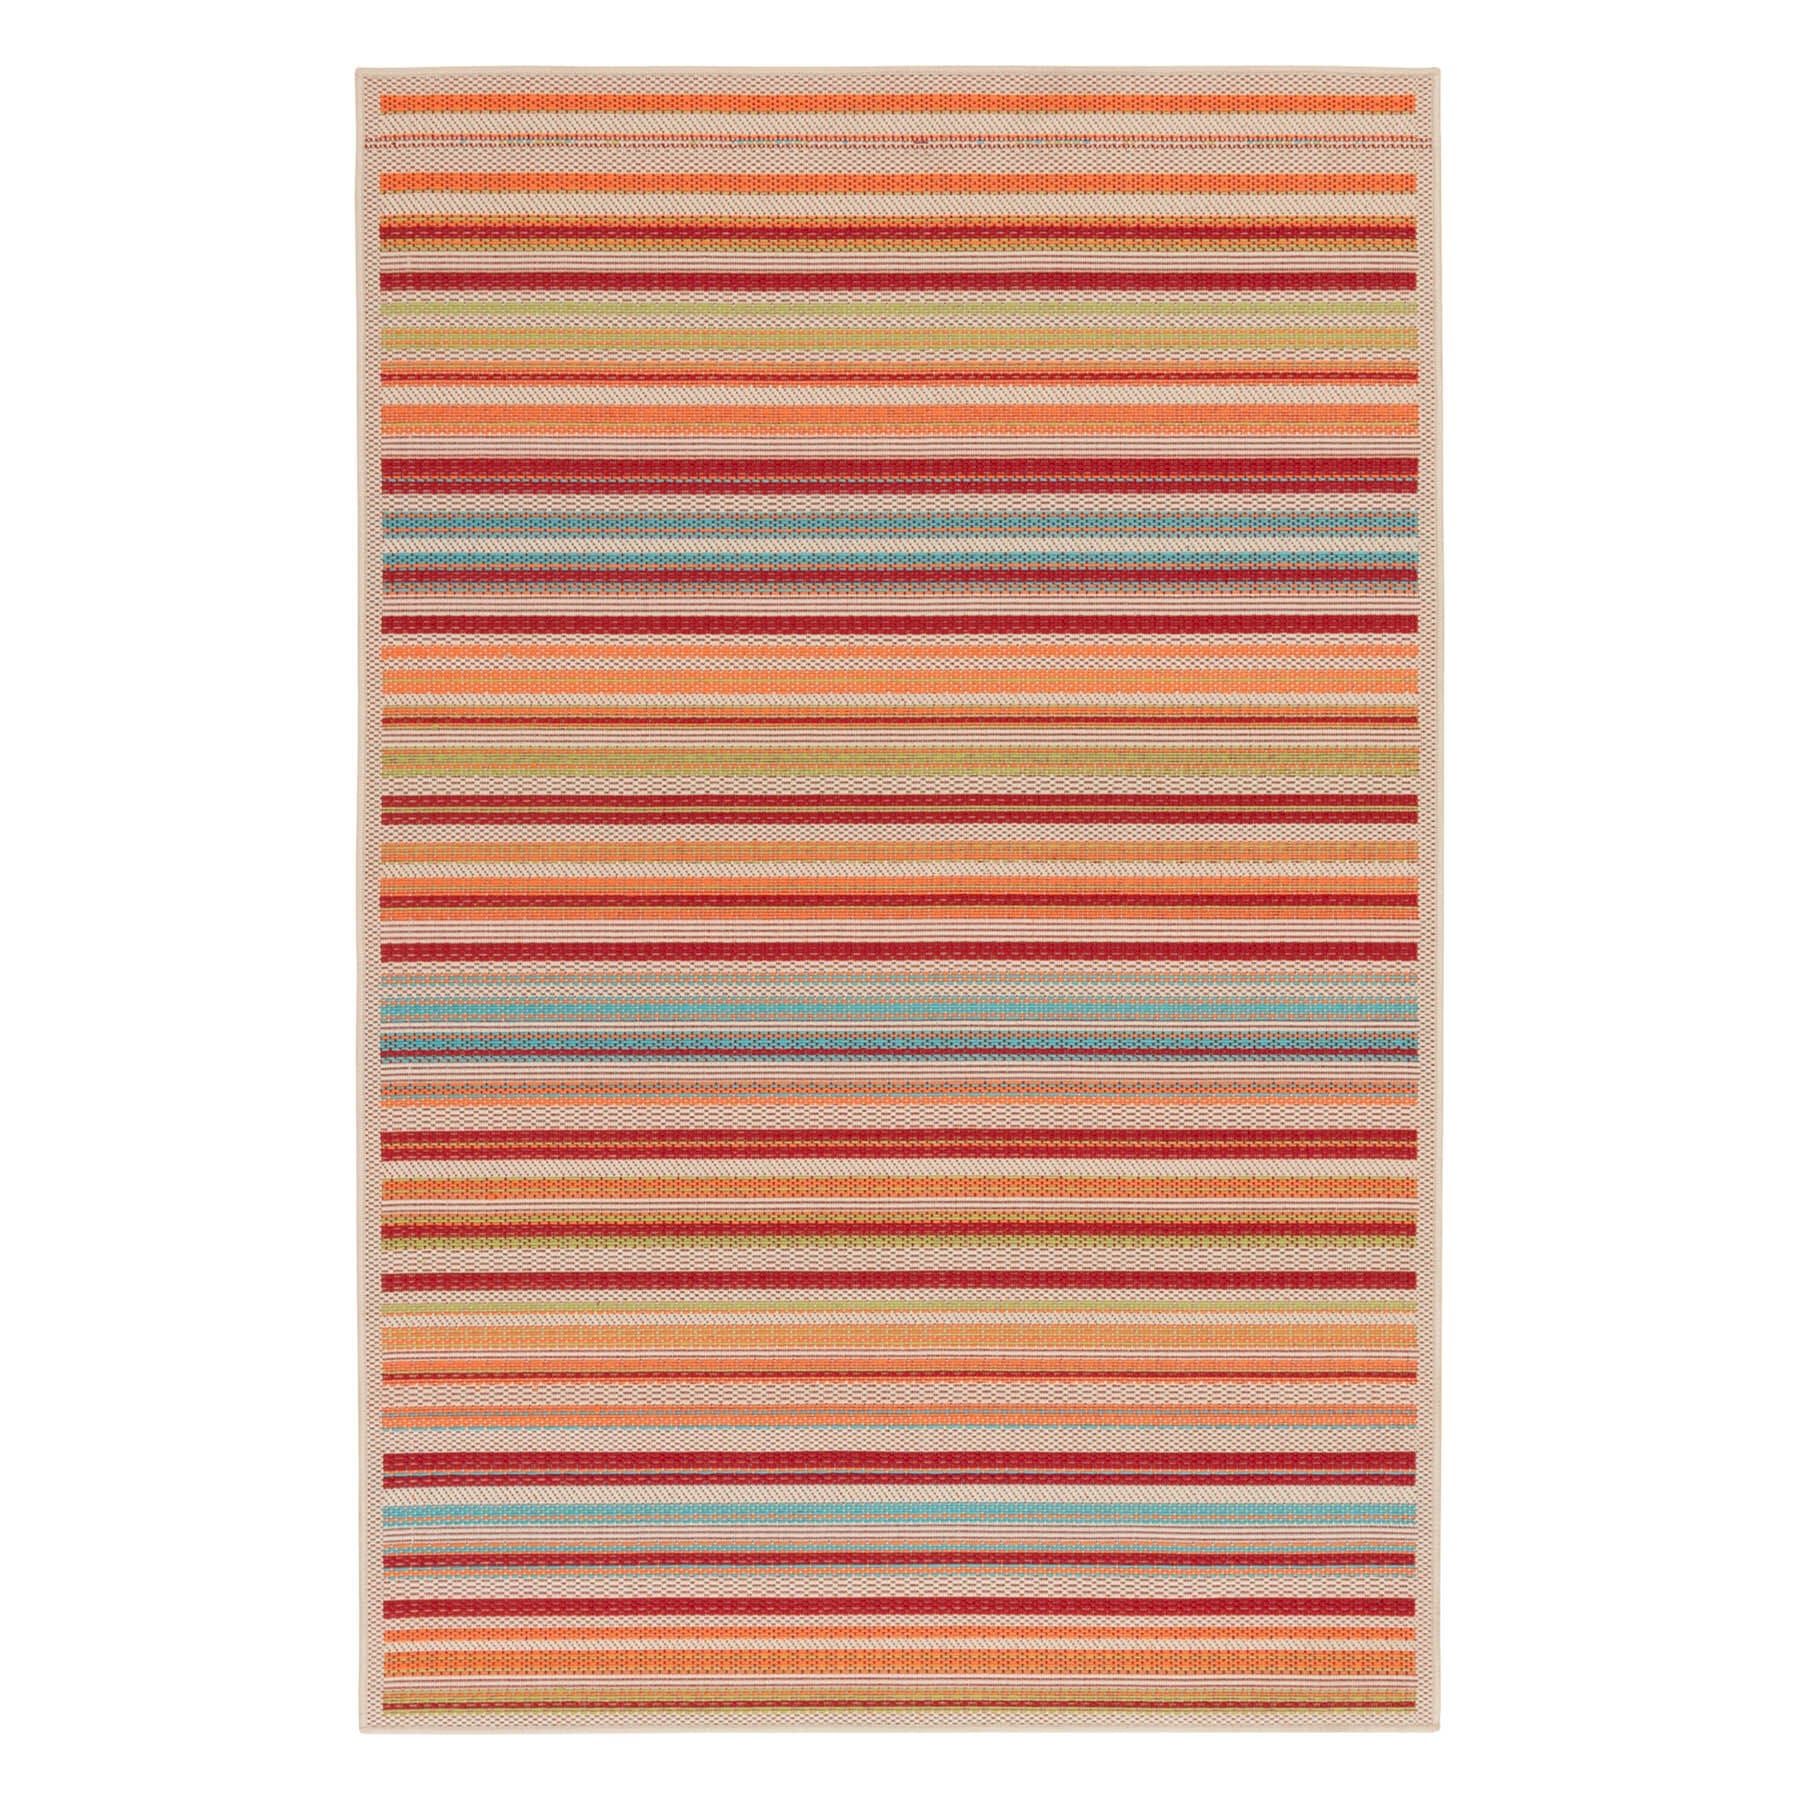 (E309) Scope Multicolor Striped Woven Indoor & Outdoor Area Rug, 5x7 - nybusiness